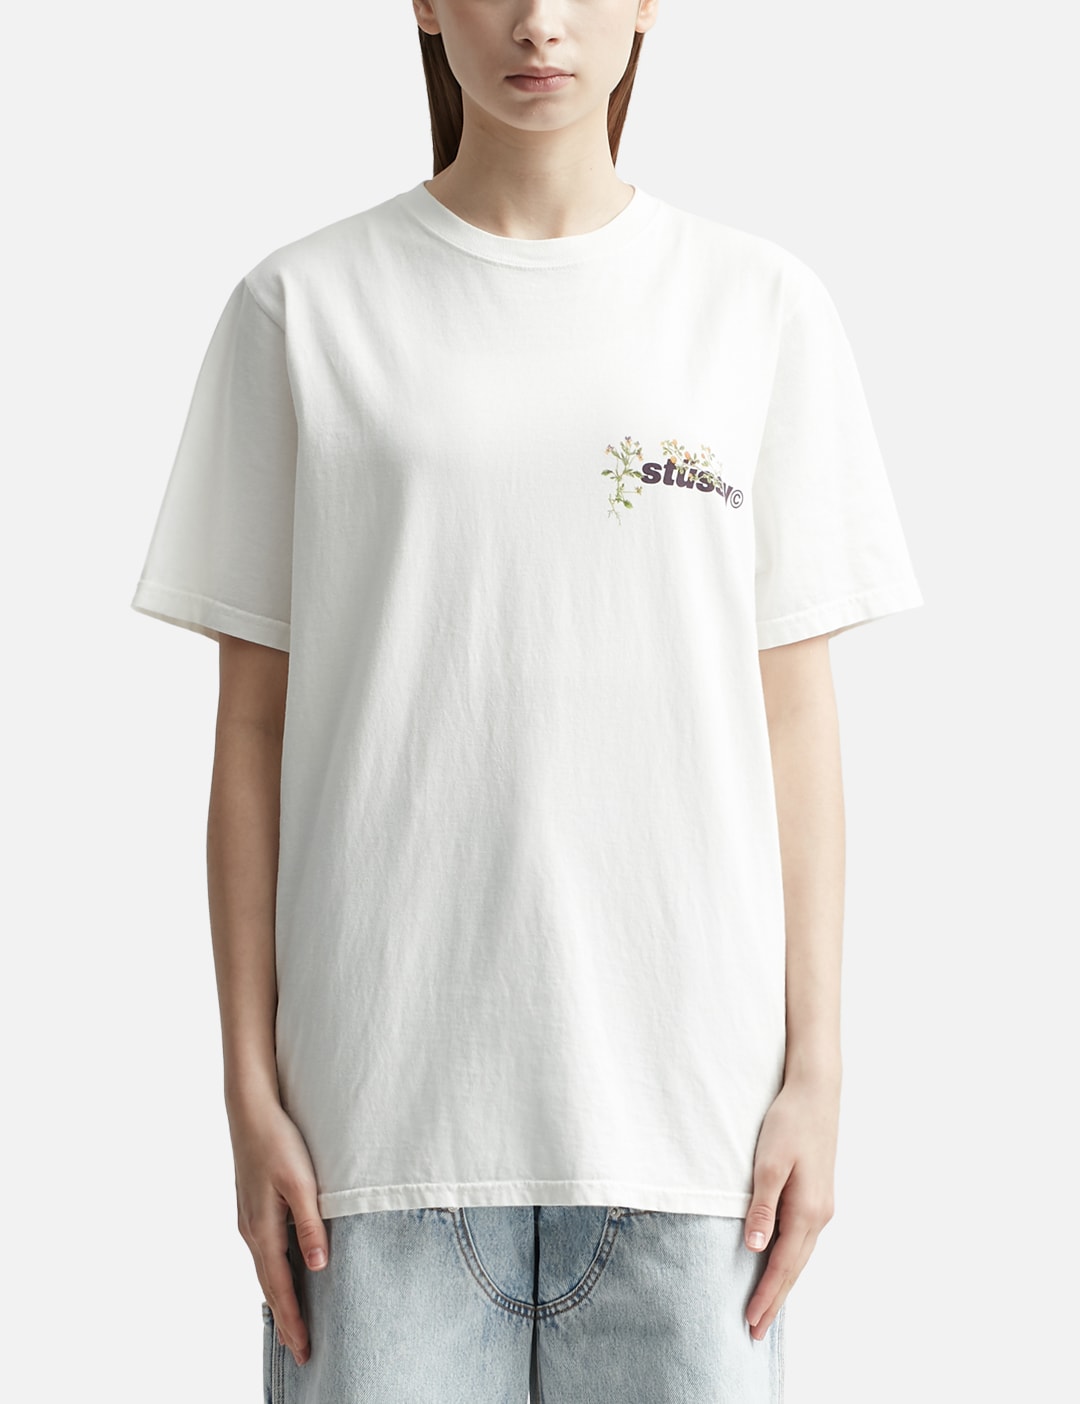 Stüssy - BOKAY PIGMENT DYED T-SHIRT | HBX - Globally Curated Fashion ...